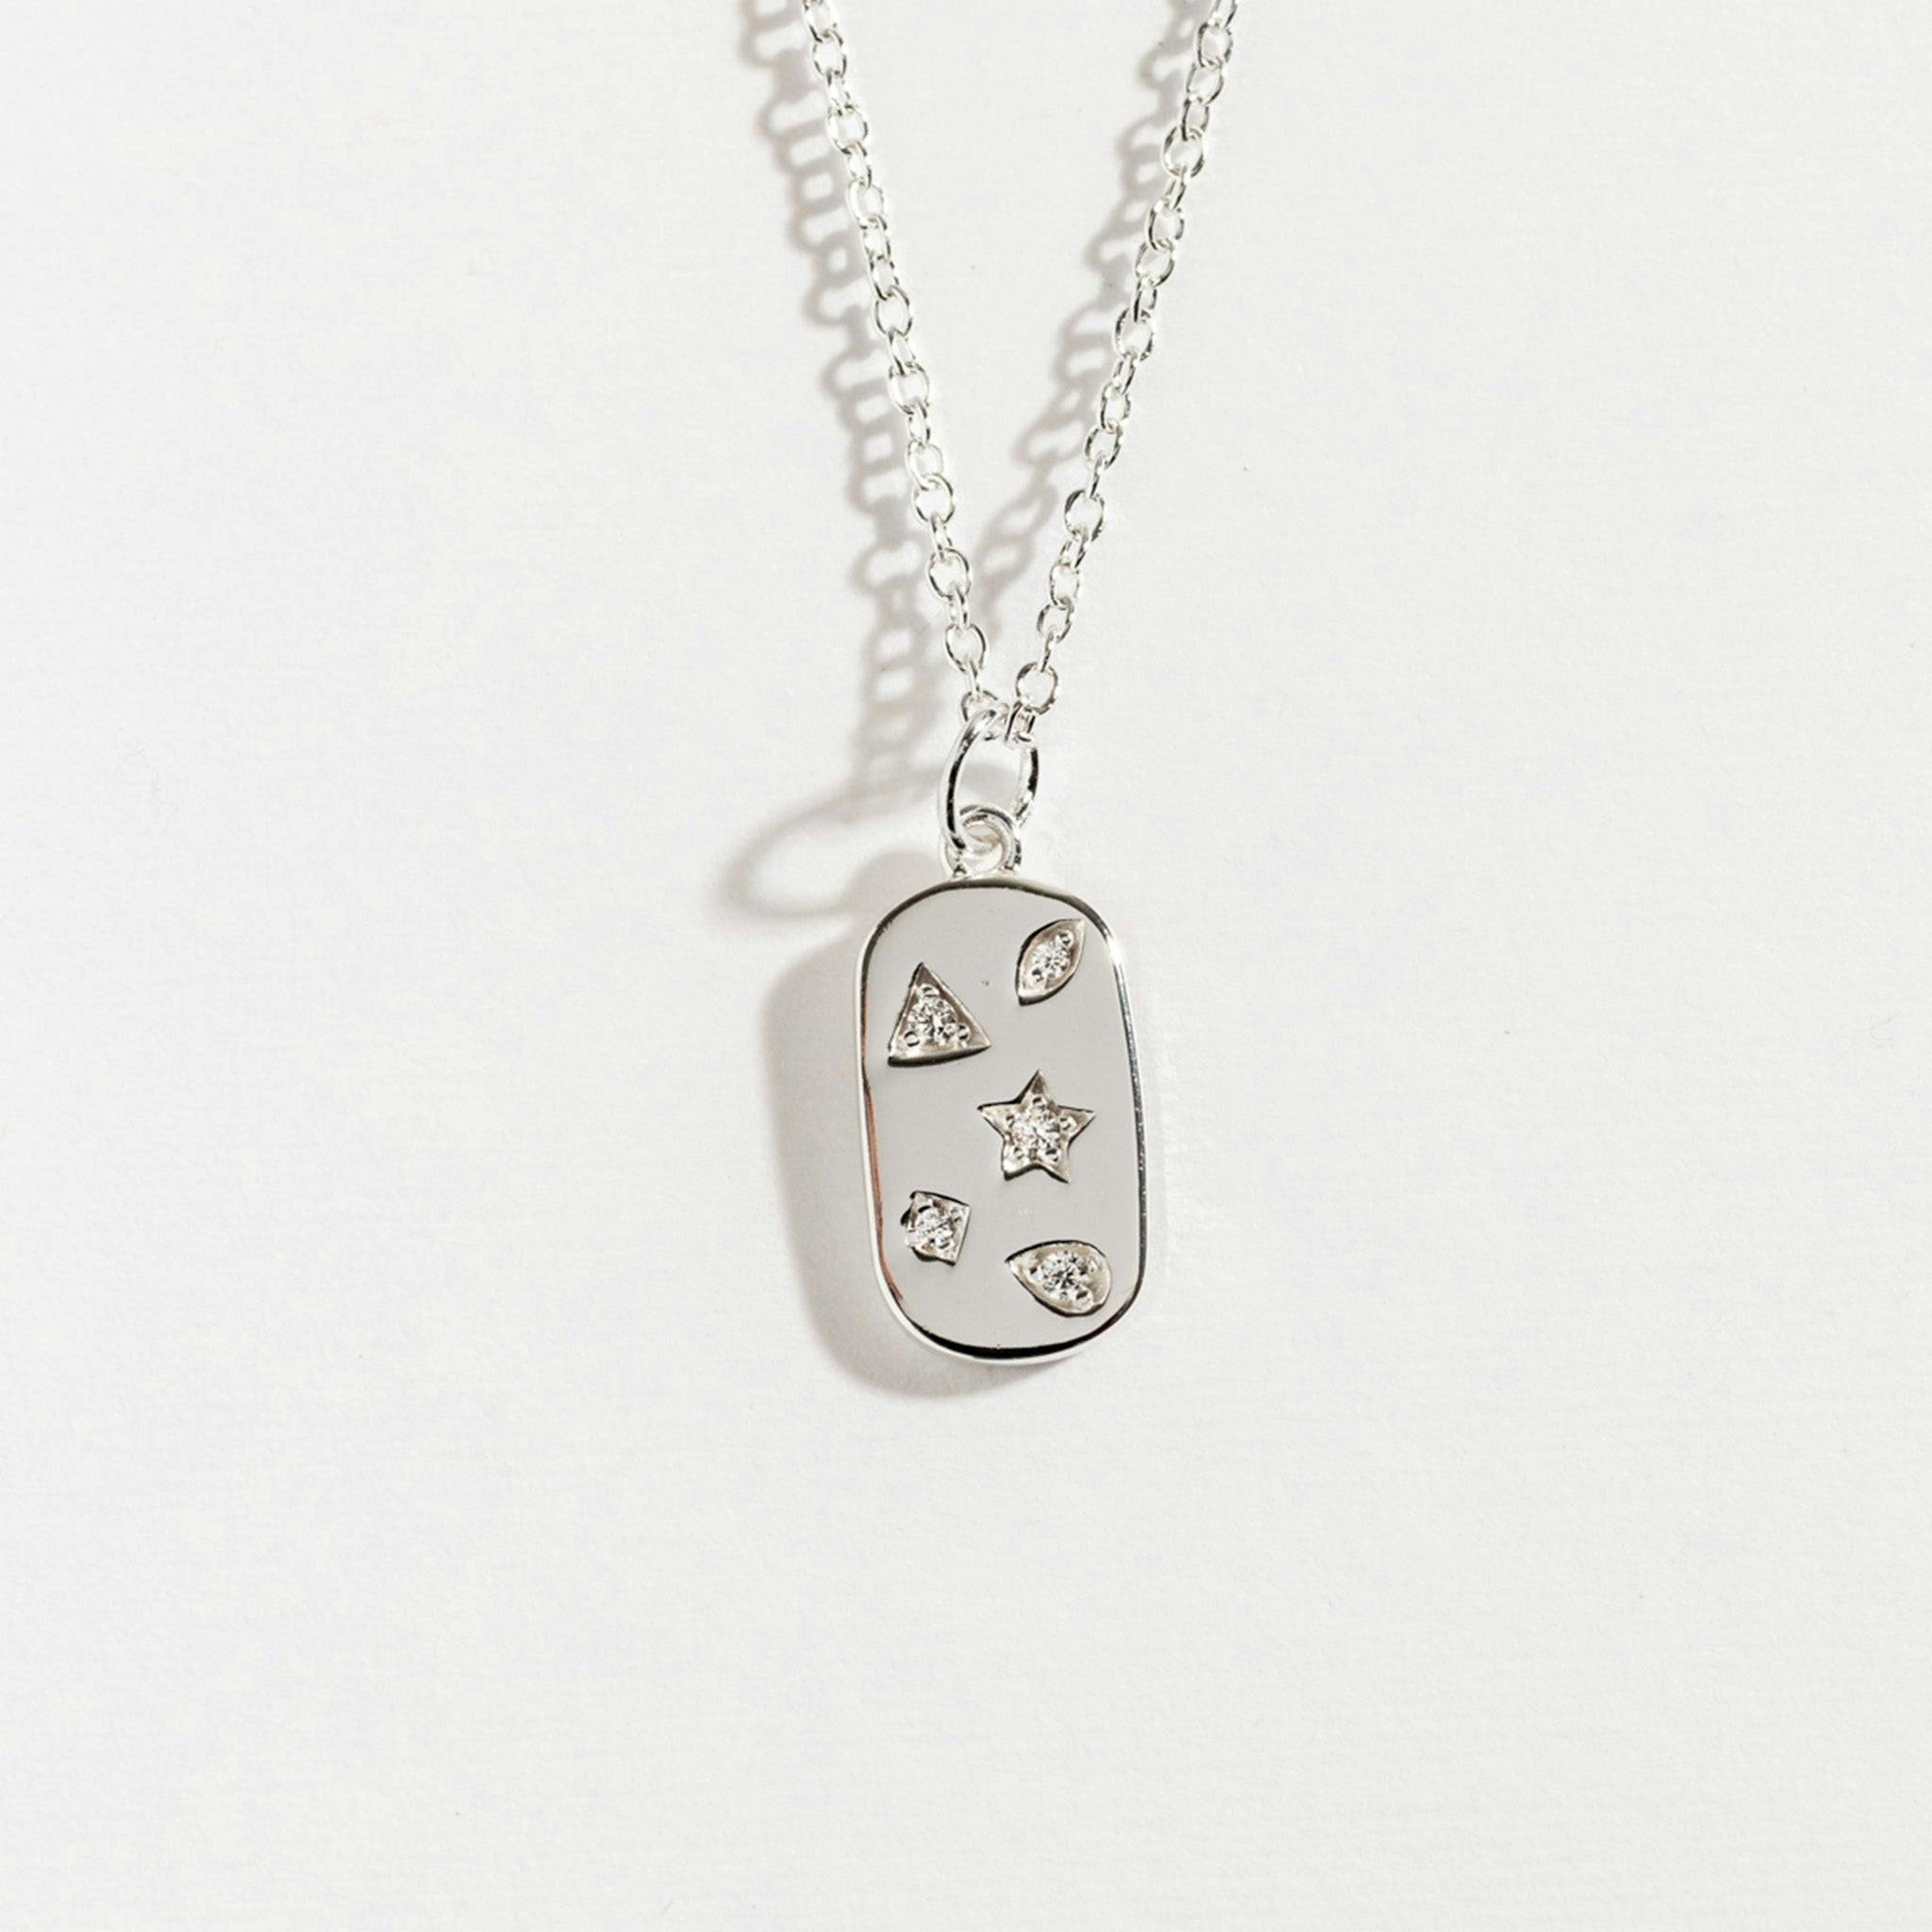 Recycled Silver Scattered Sparkly Dog Tag Necklace | Adjustable